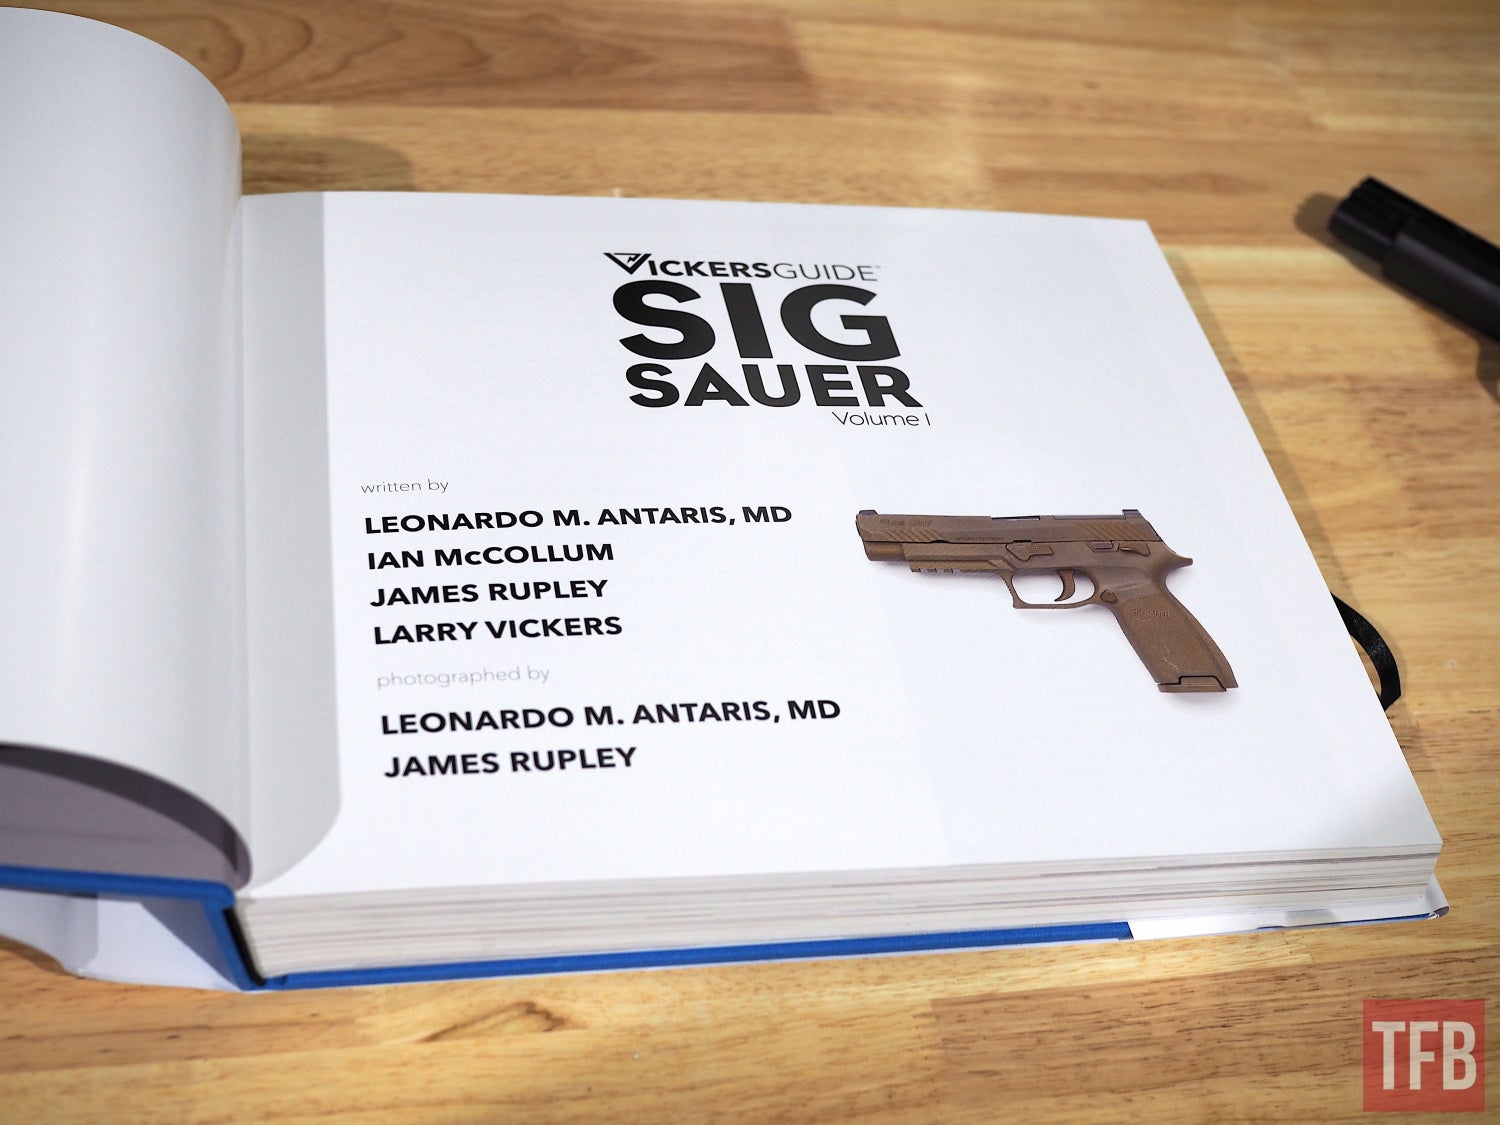 Like all other Vickers Guides, Sig Vol. 1 has an excellent cast of contributors